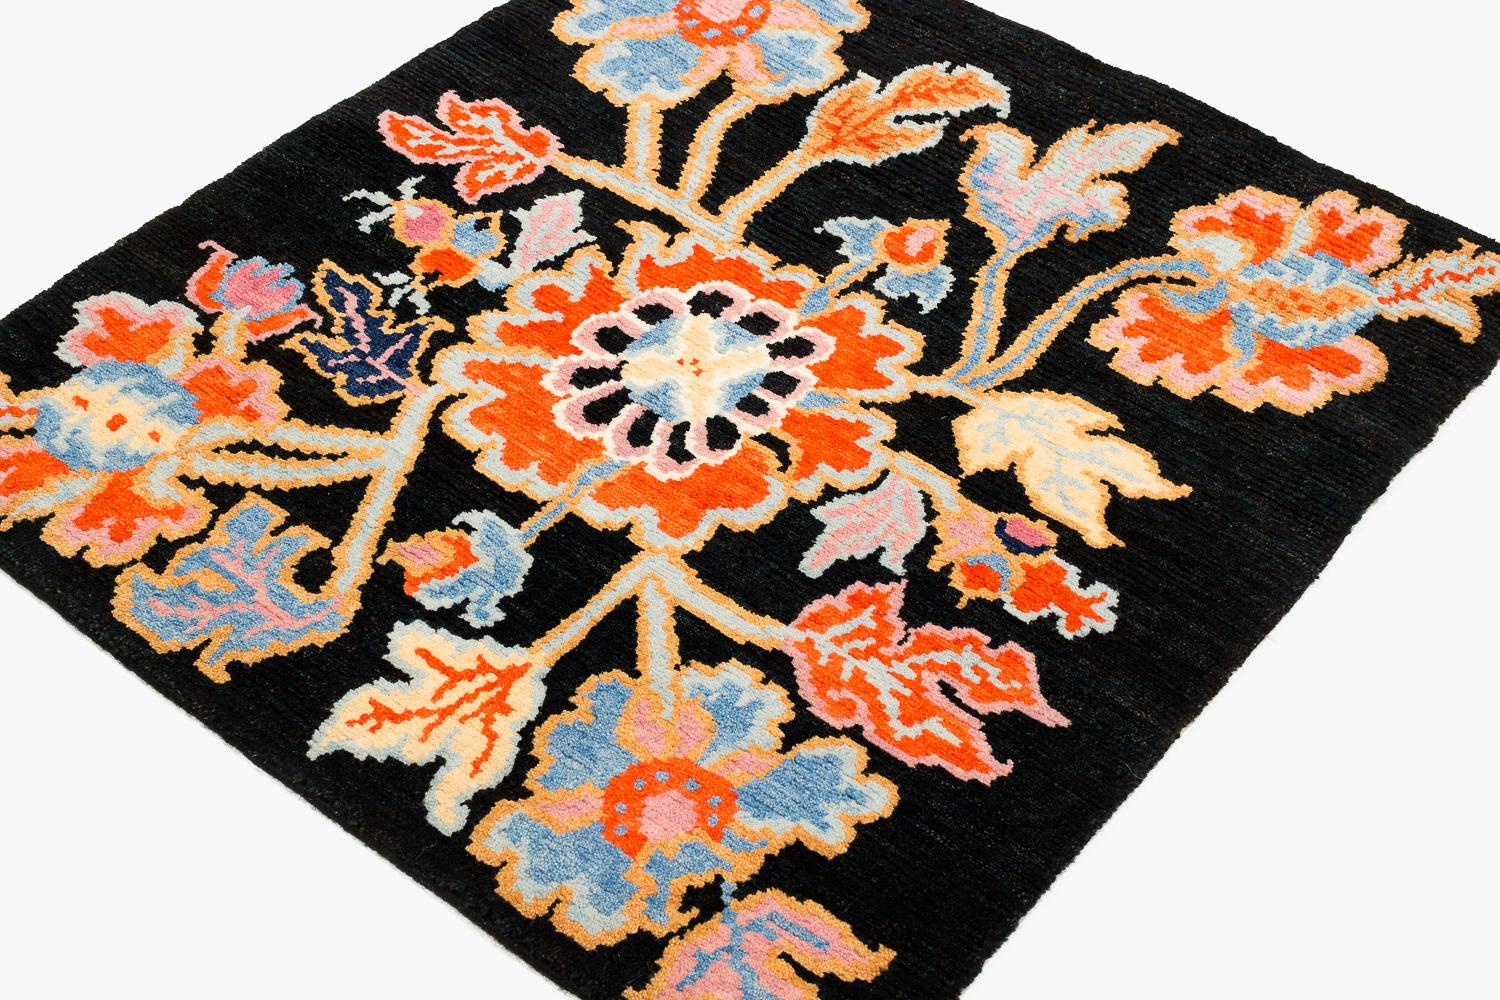 This rug is woven in a special weaving project in a women's coop using special lost weaving techniques. We use secret knotting techniques to make special effects. 

The rug is woven in all natural botanical dyes and is extremely authentic.

This